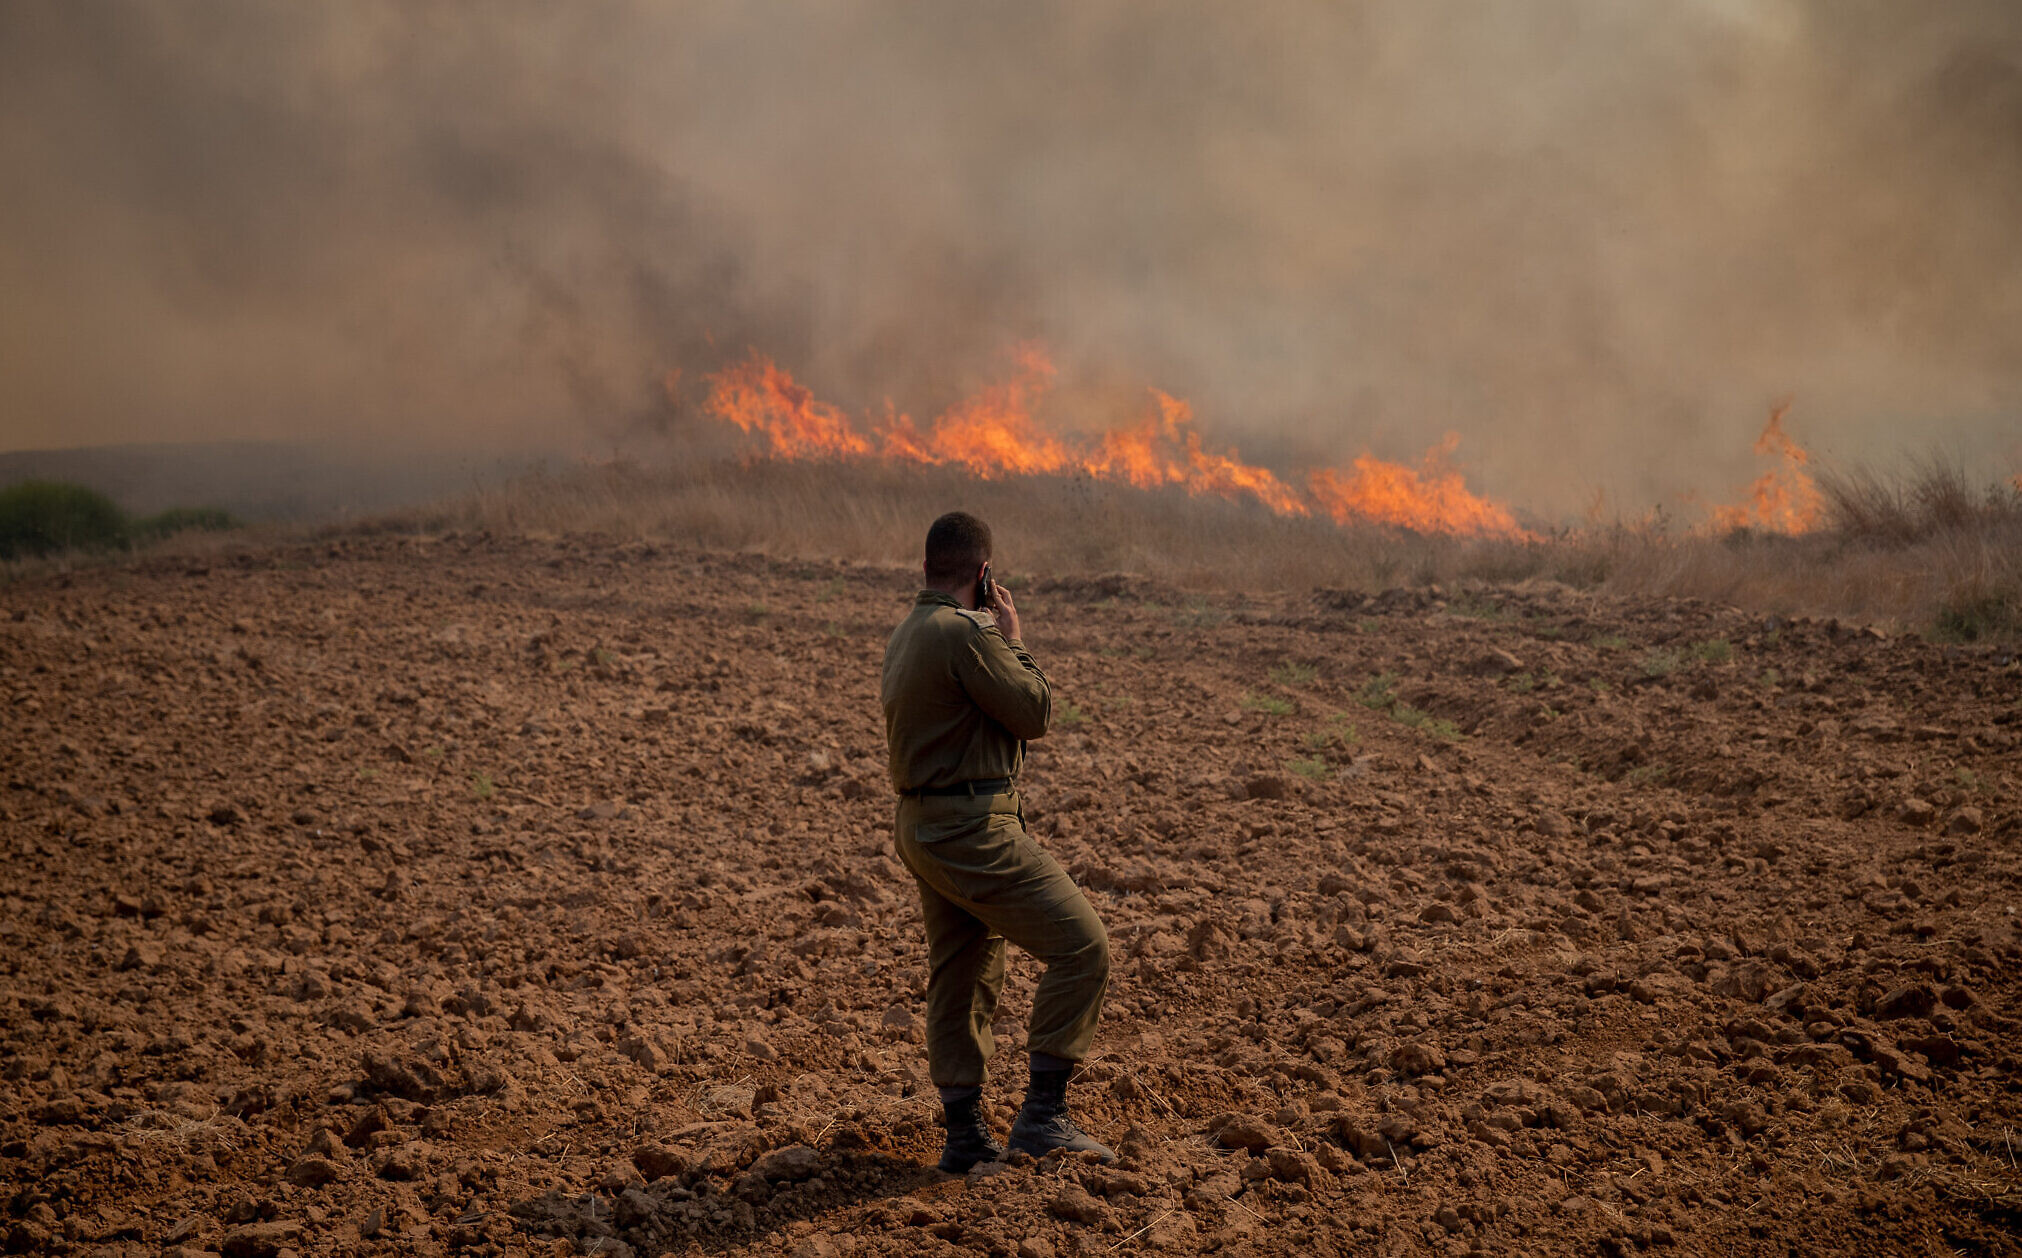 Gaza fire balloons spark 19 blazes in south on Saturday | The ...